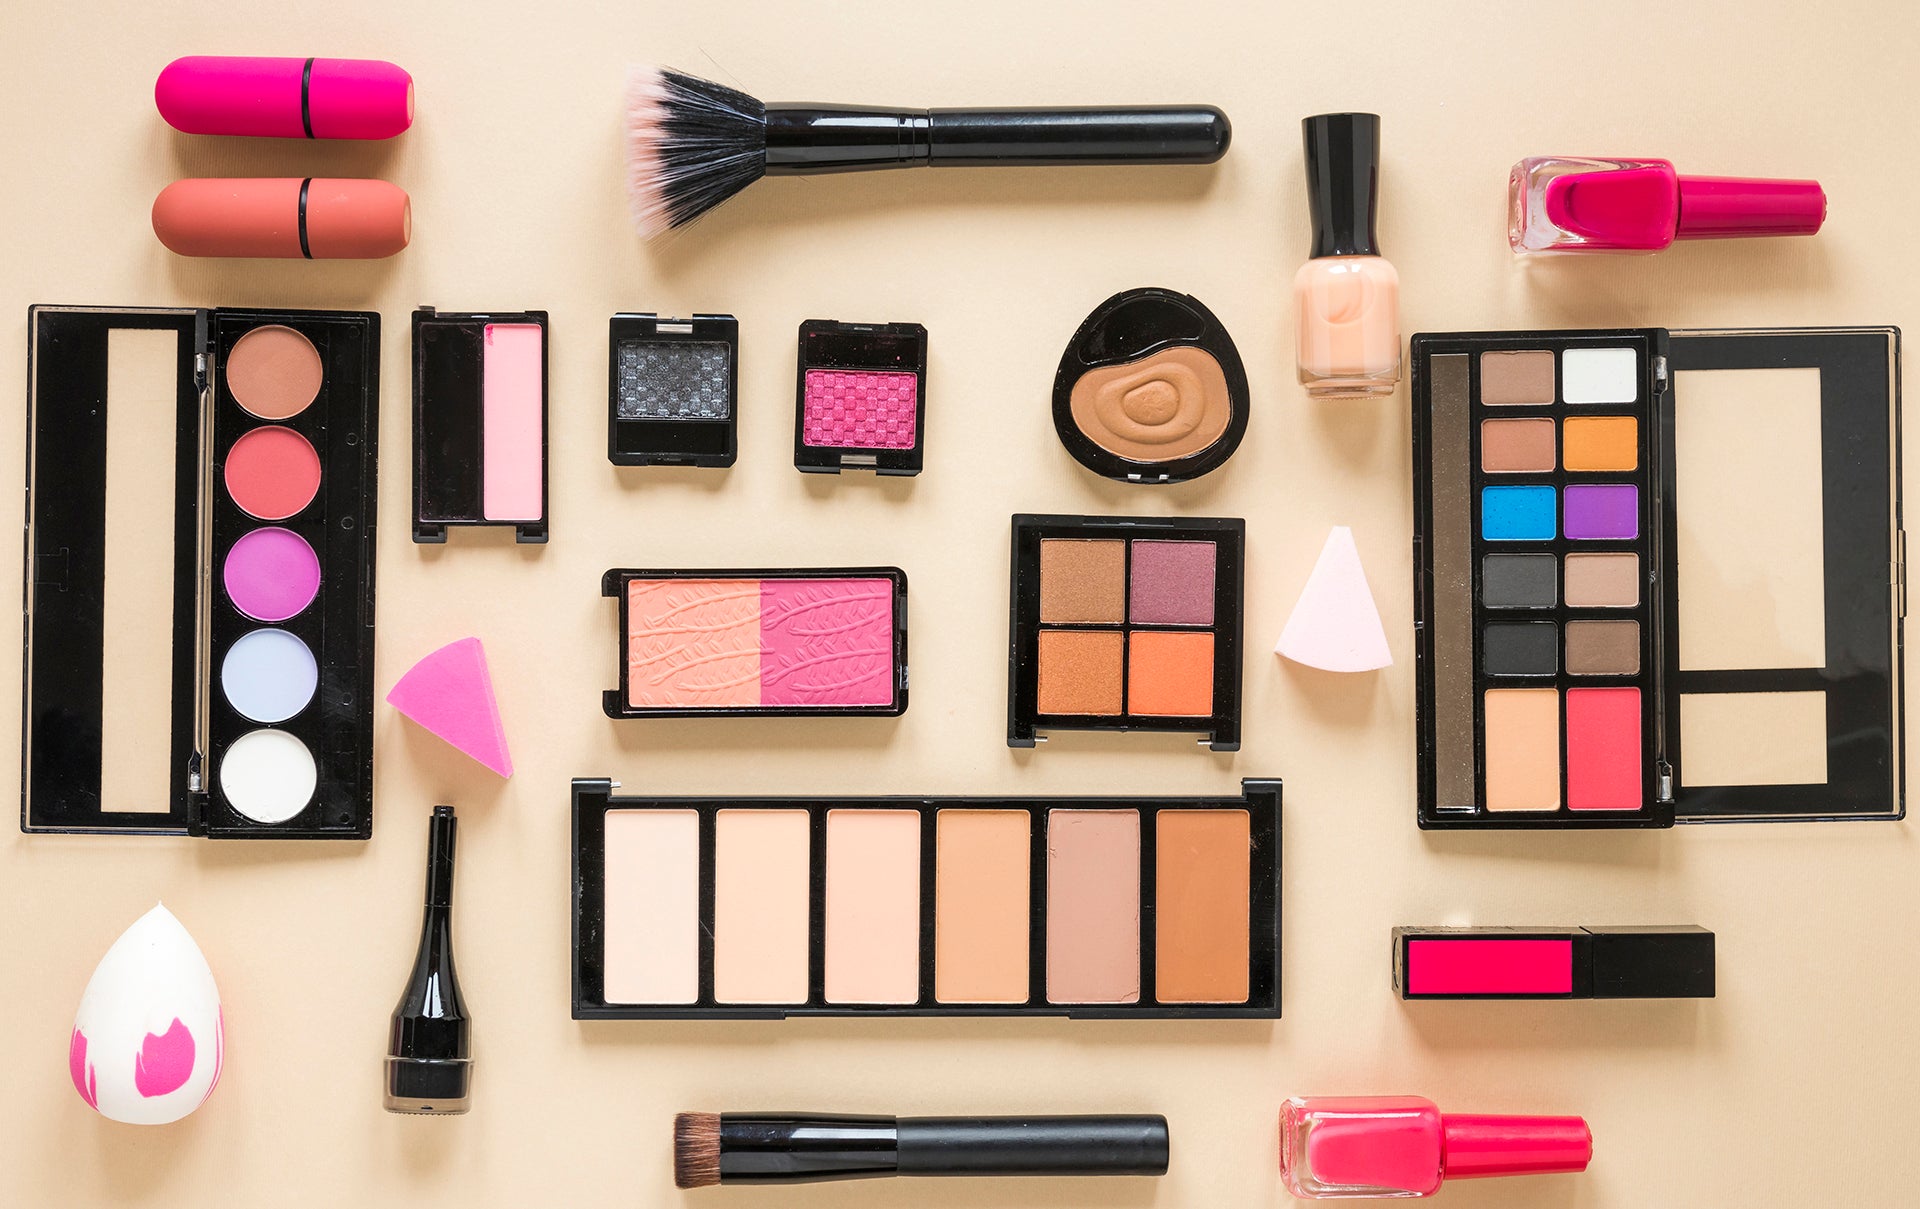 Essential Make-Up Items To Pack For Any Vacation/Trip